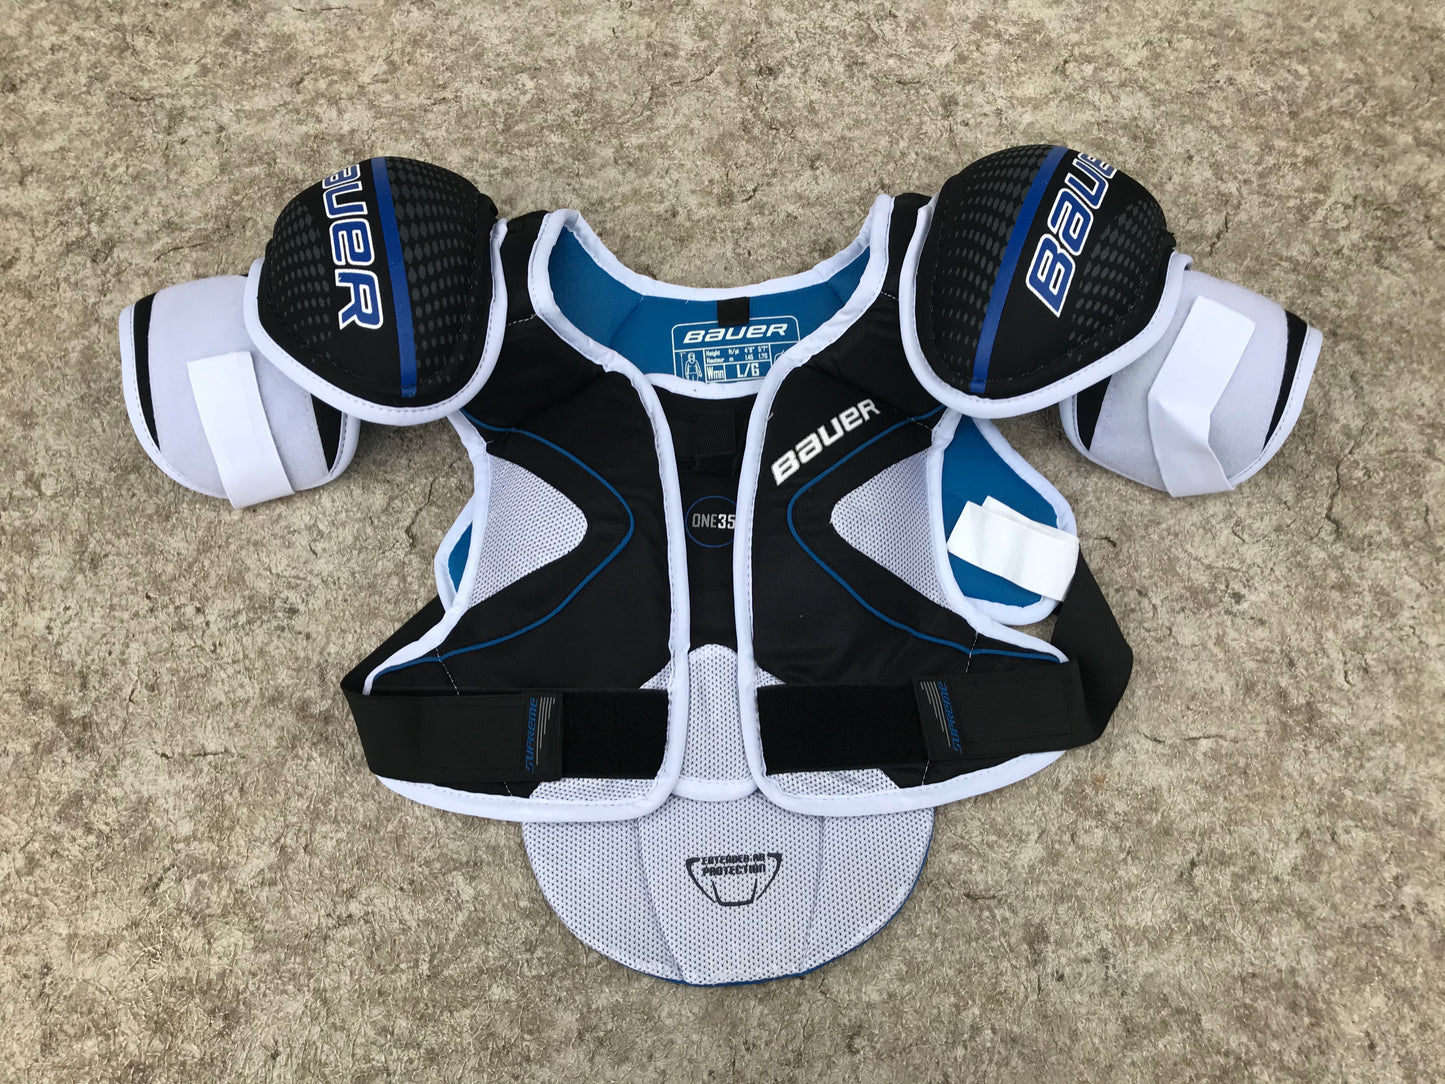 Hockey Chest Pad Ladies Size Large Bauer One 35 Blue Black White New With Tags